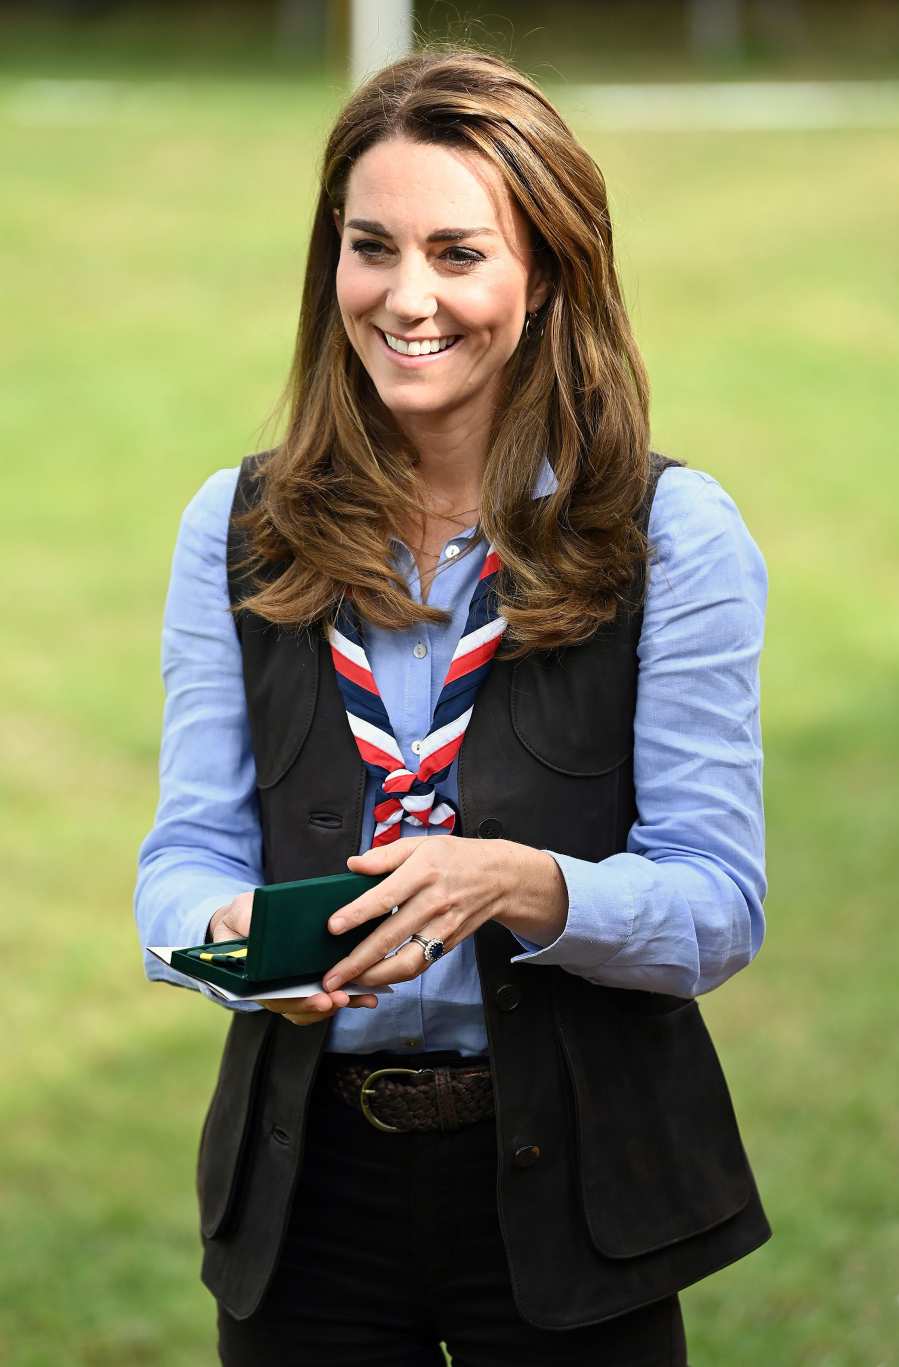 Kate Middleton Makes Camp Attire Chic in New Look